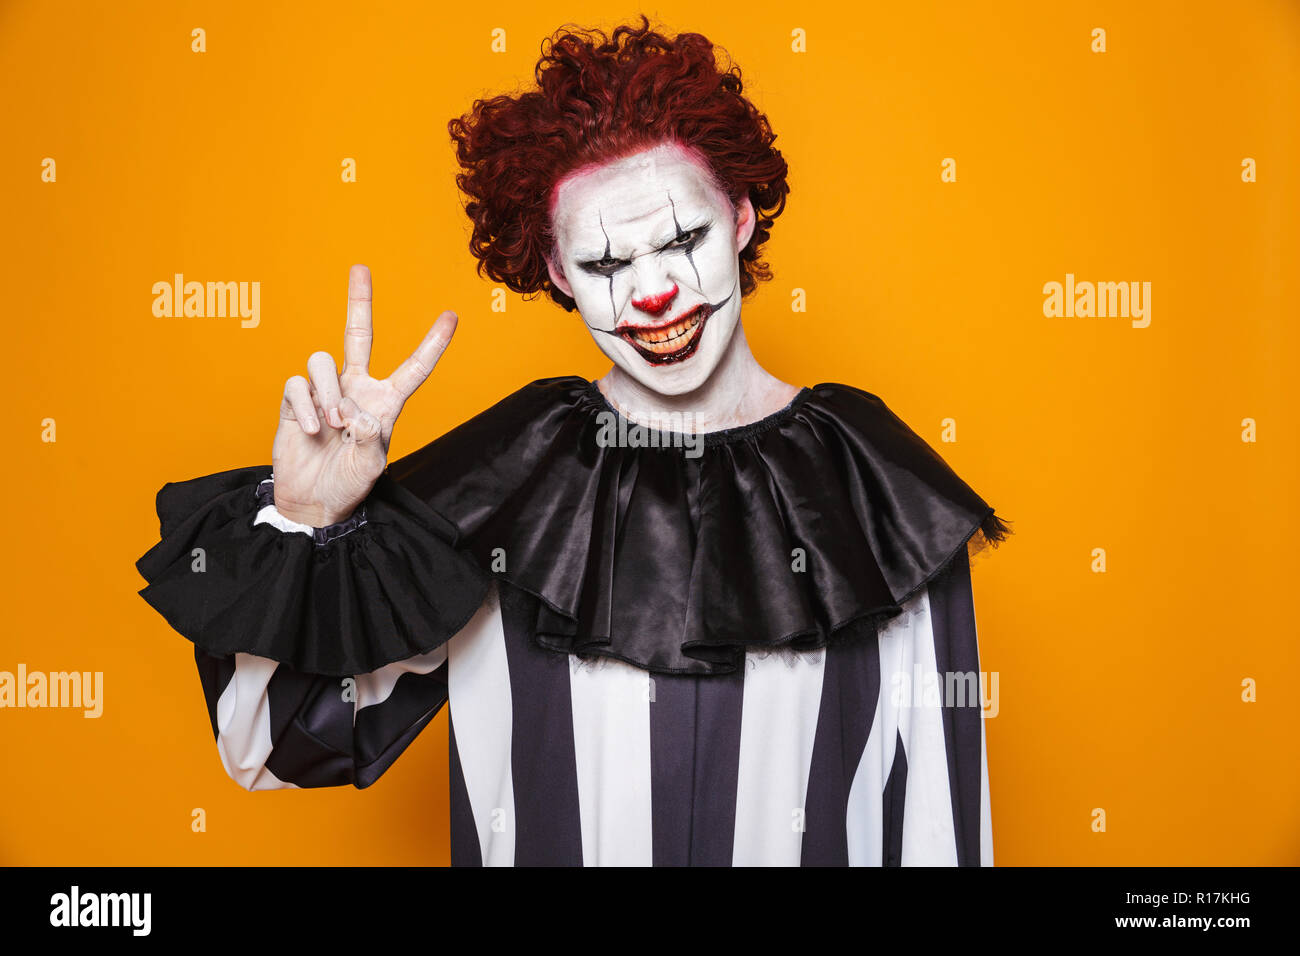 Frightening clown man 20s wearing black costume and halloween makeup looking at camera isolated over yellow background Stock Photo